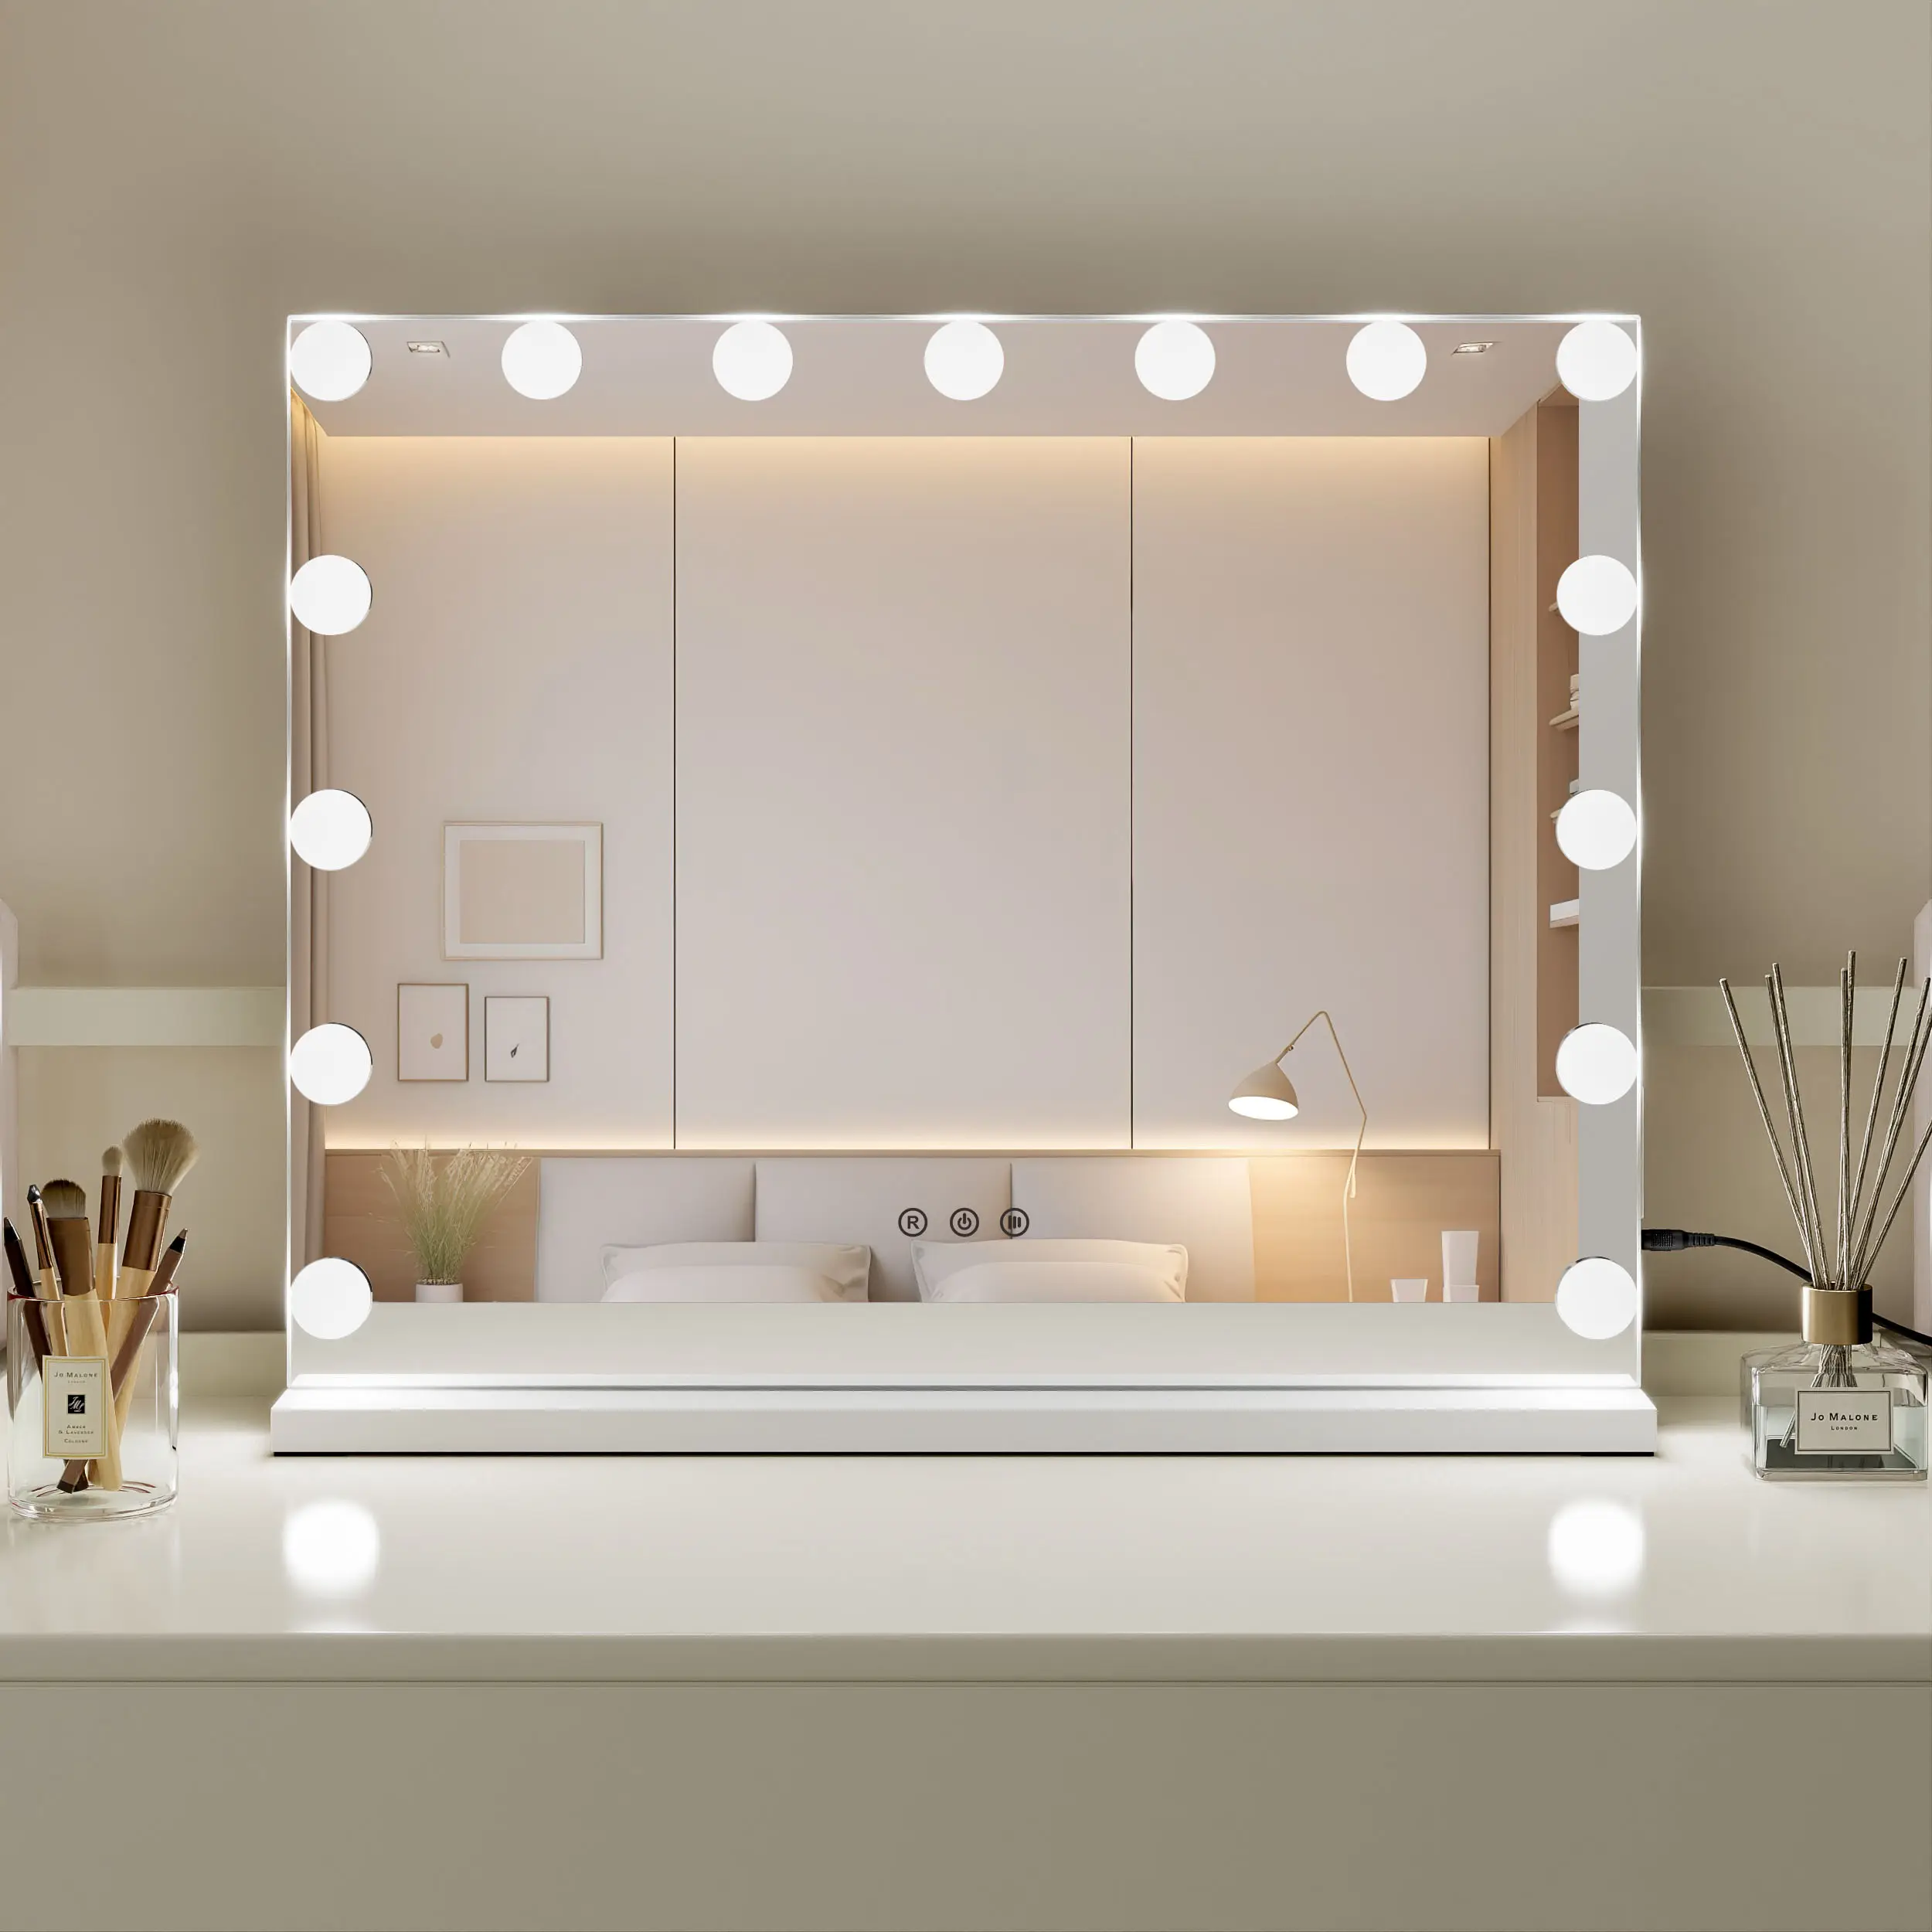 Light Up Illuminated Cosmetic Sensor Switch Touch Screen Led Makeup Cosmetic Mirror Hollywood Vanity Mirror